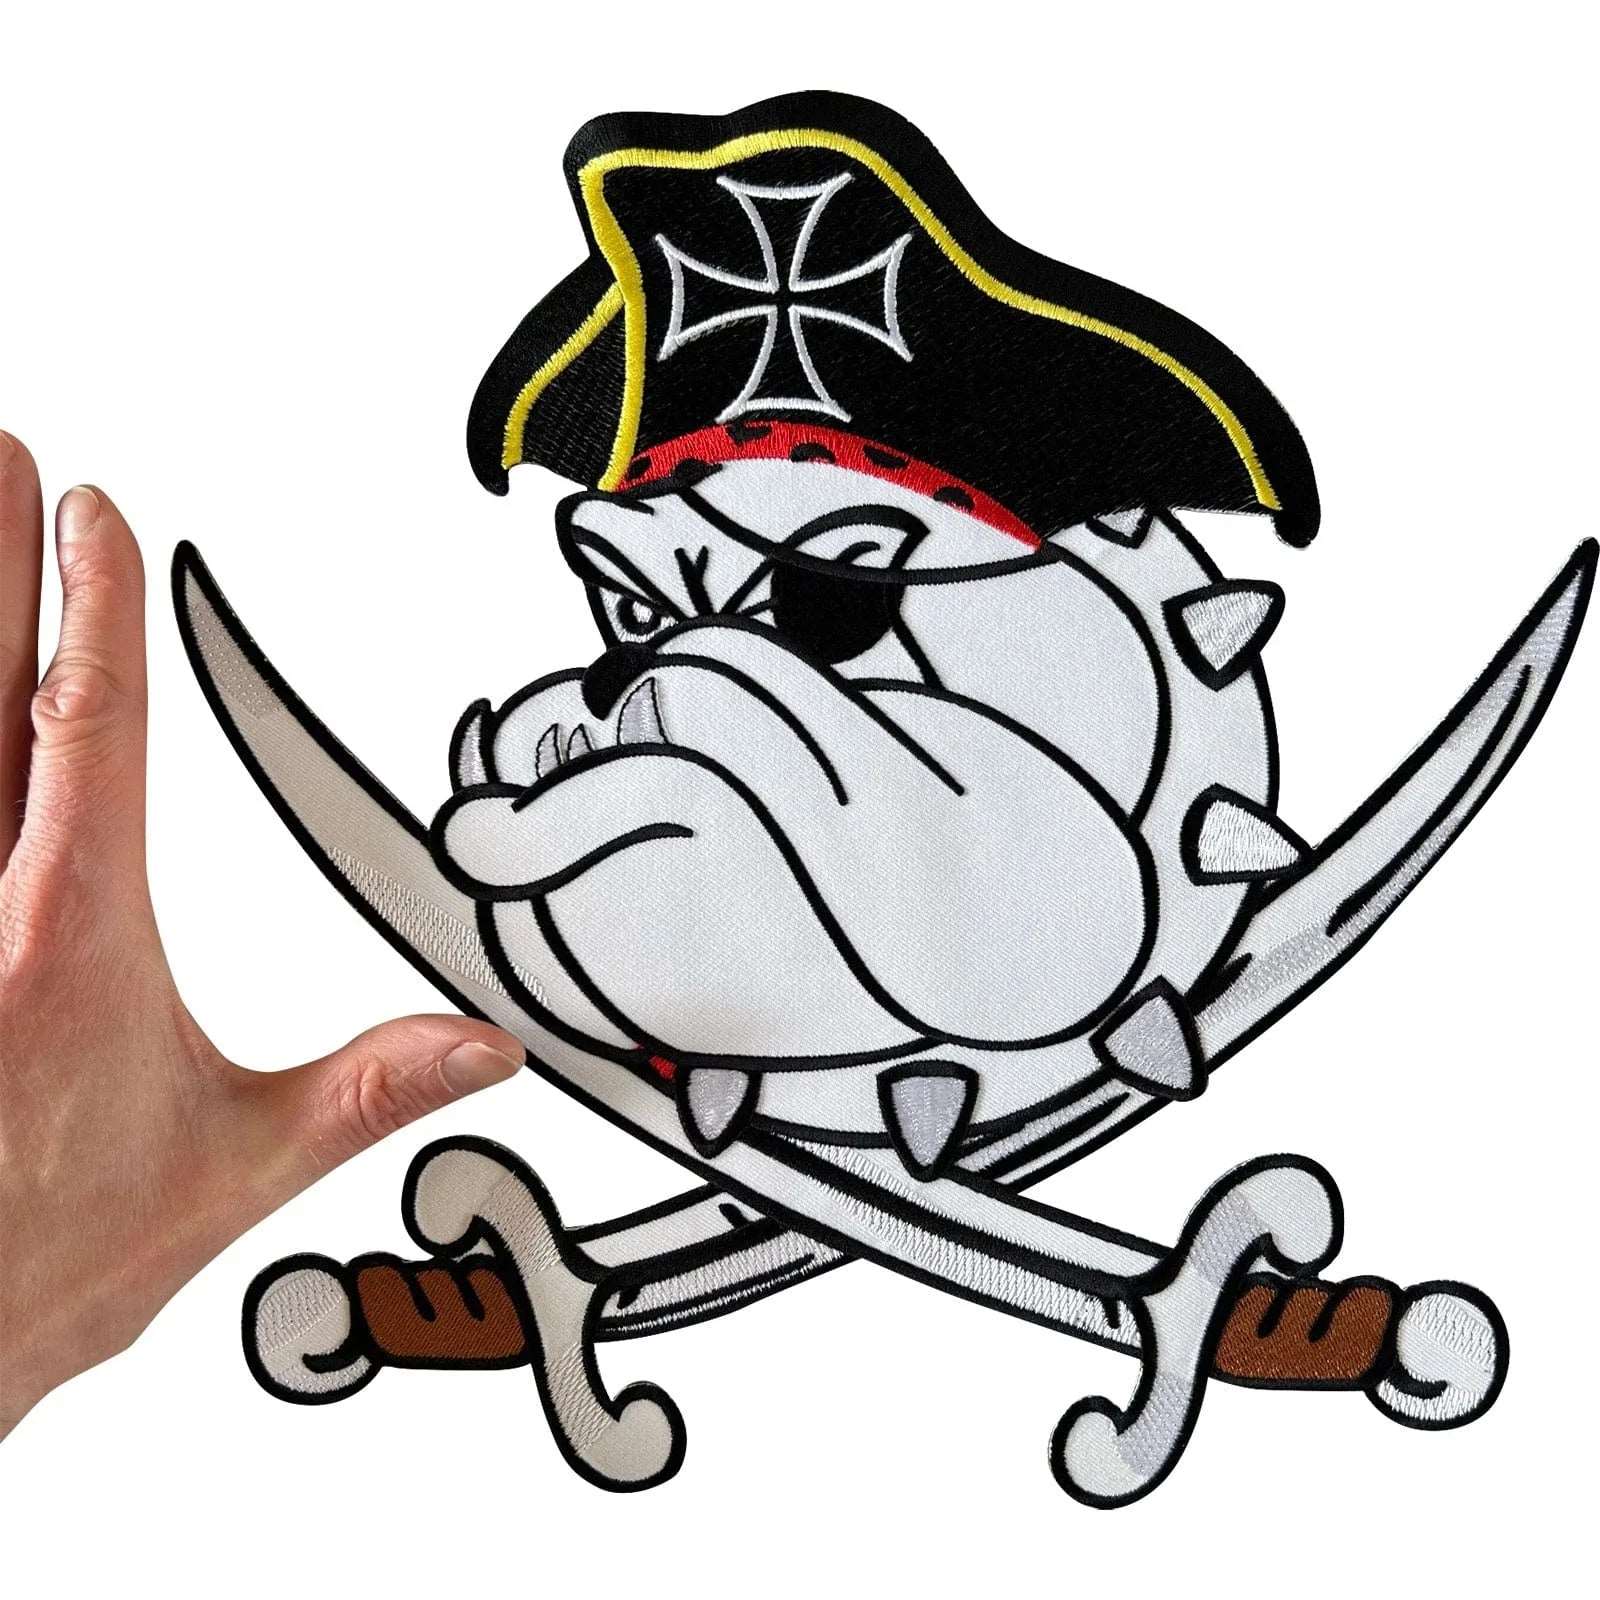 Big Large Crossed Cutlass Pirate Bulldog Patch Iron On Sew On Embroidered Badge